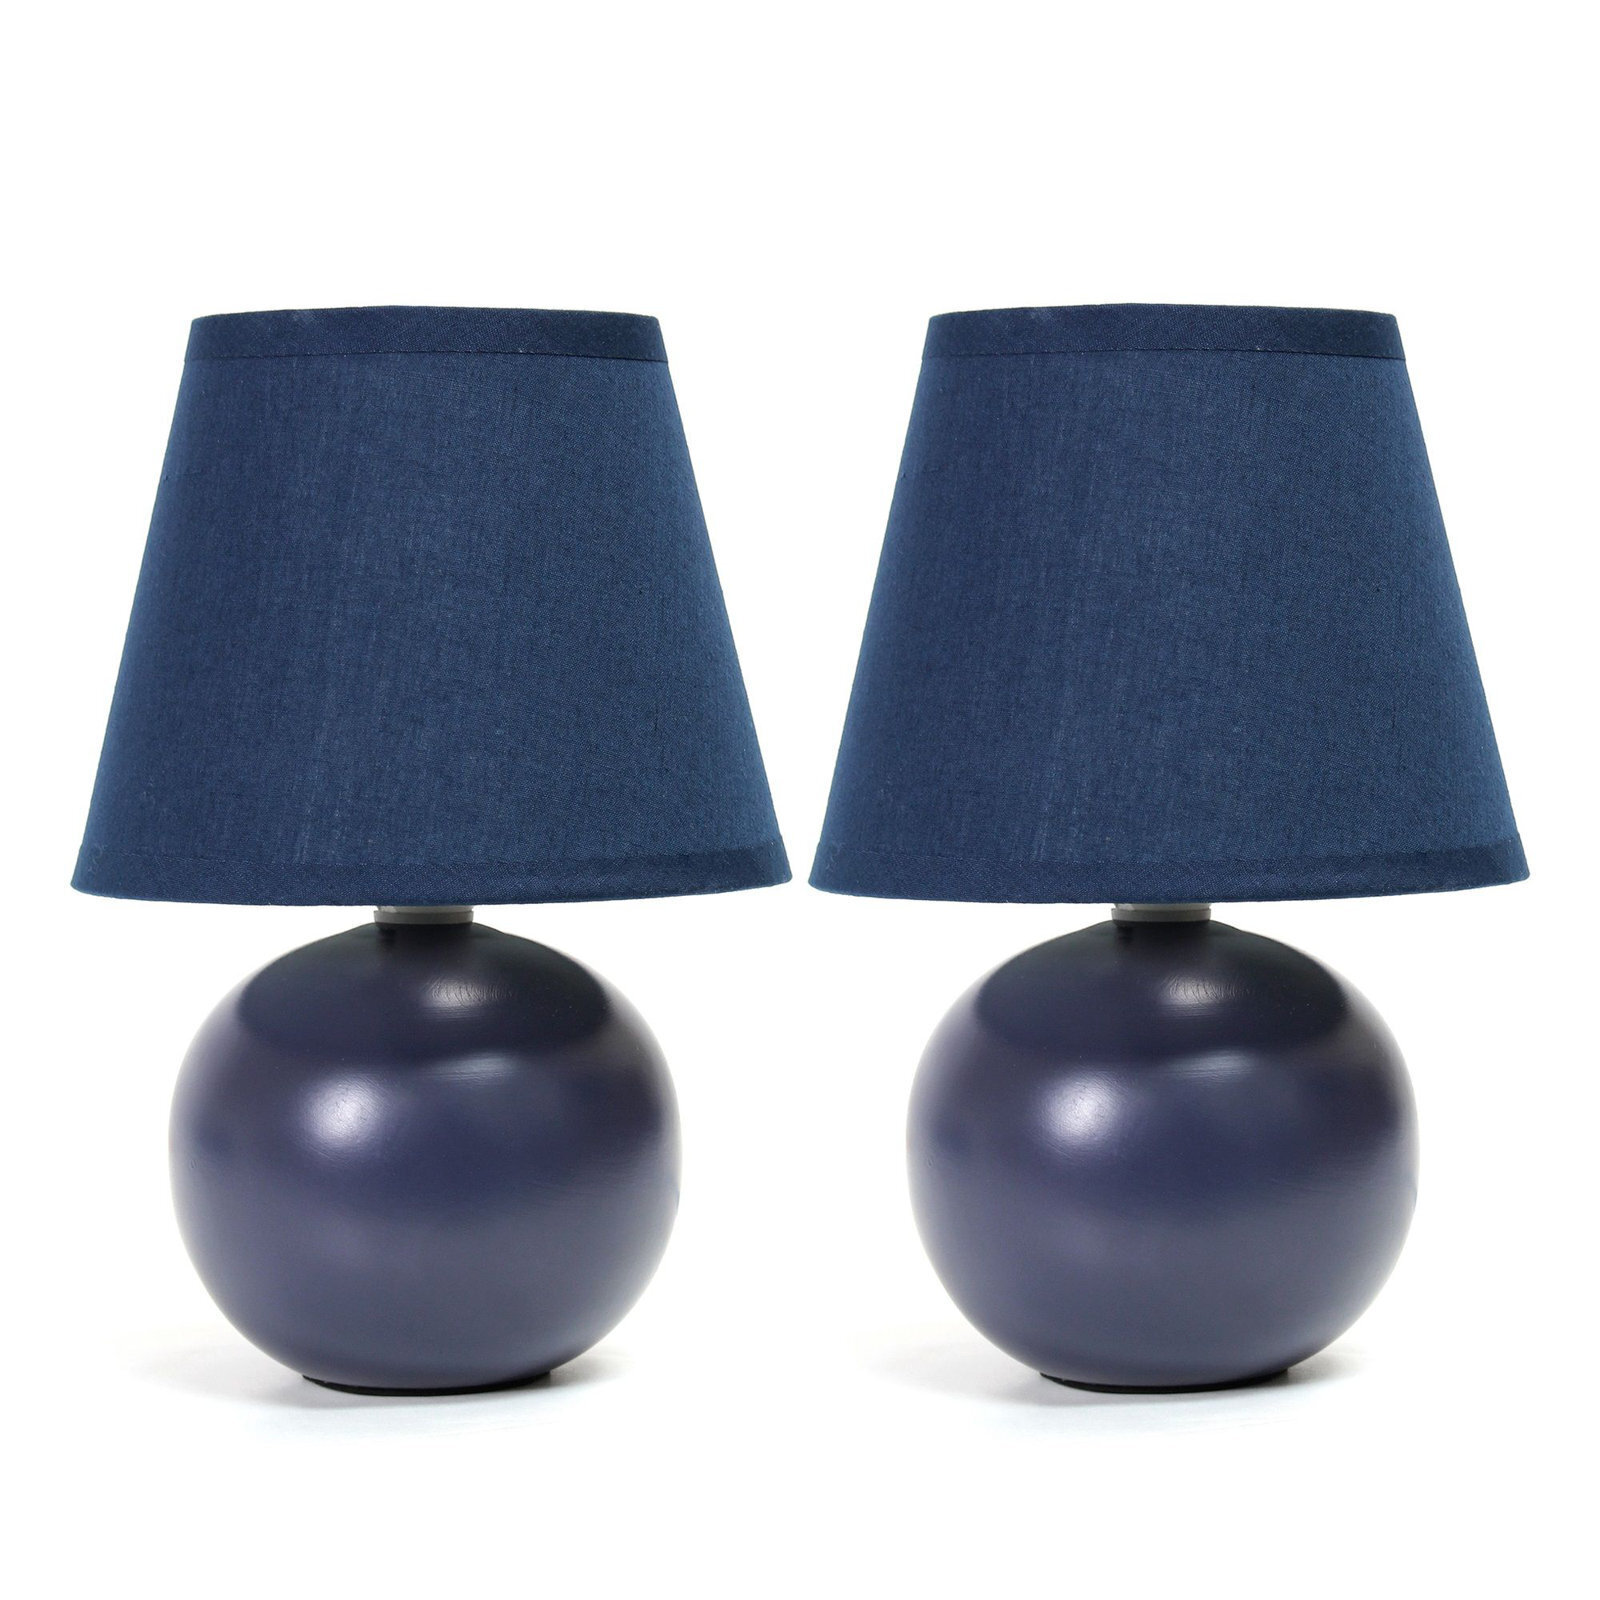 Small Globe Navy Blue Bedside Lamps